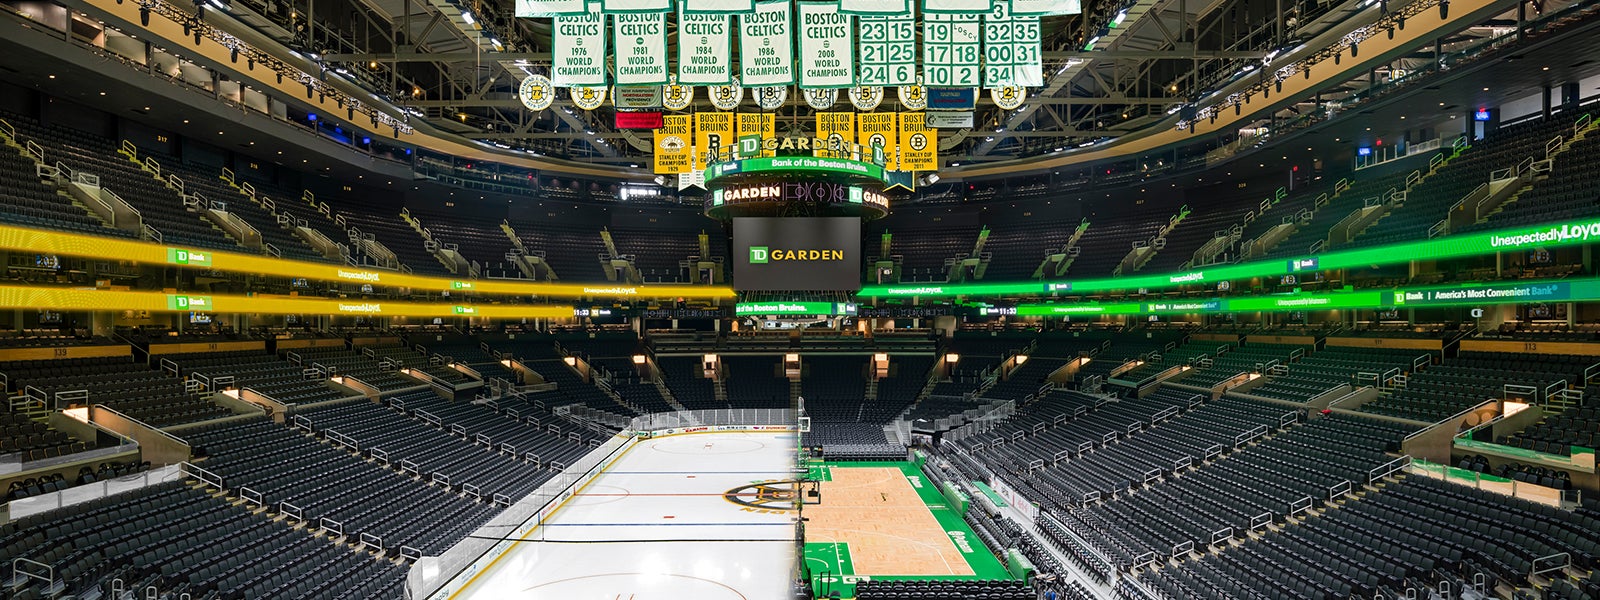 Td Garden Bruins / Td Garden Ces Consulting Engineering Services Ct Ma